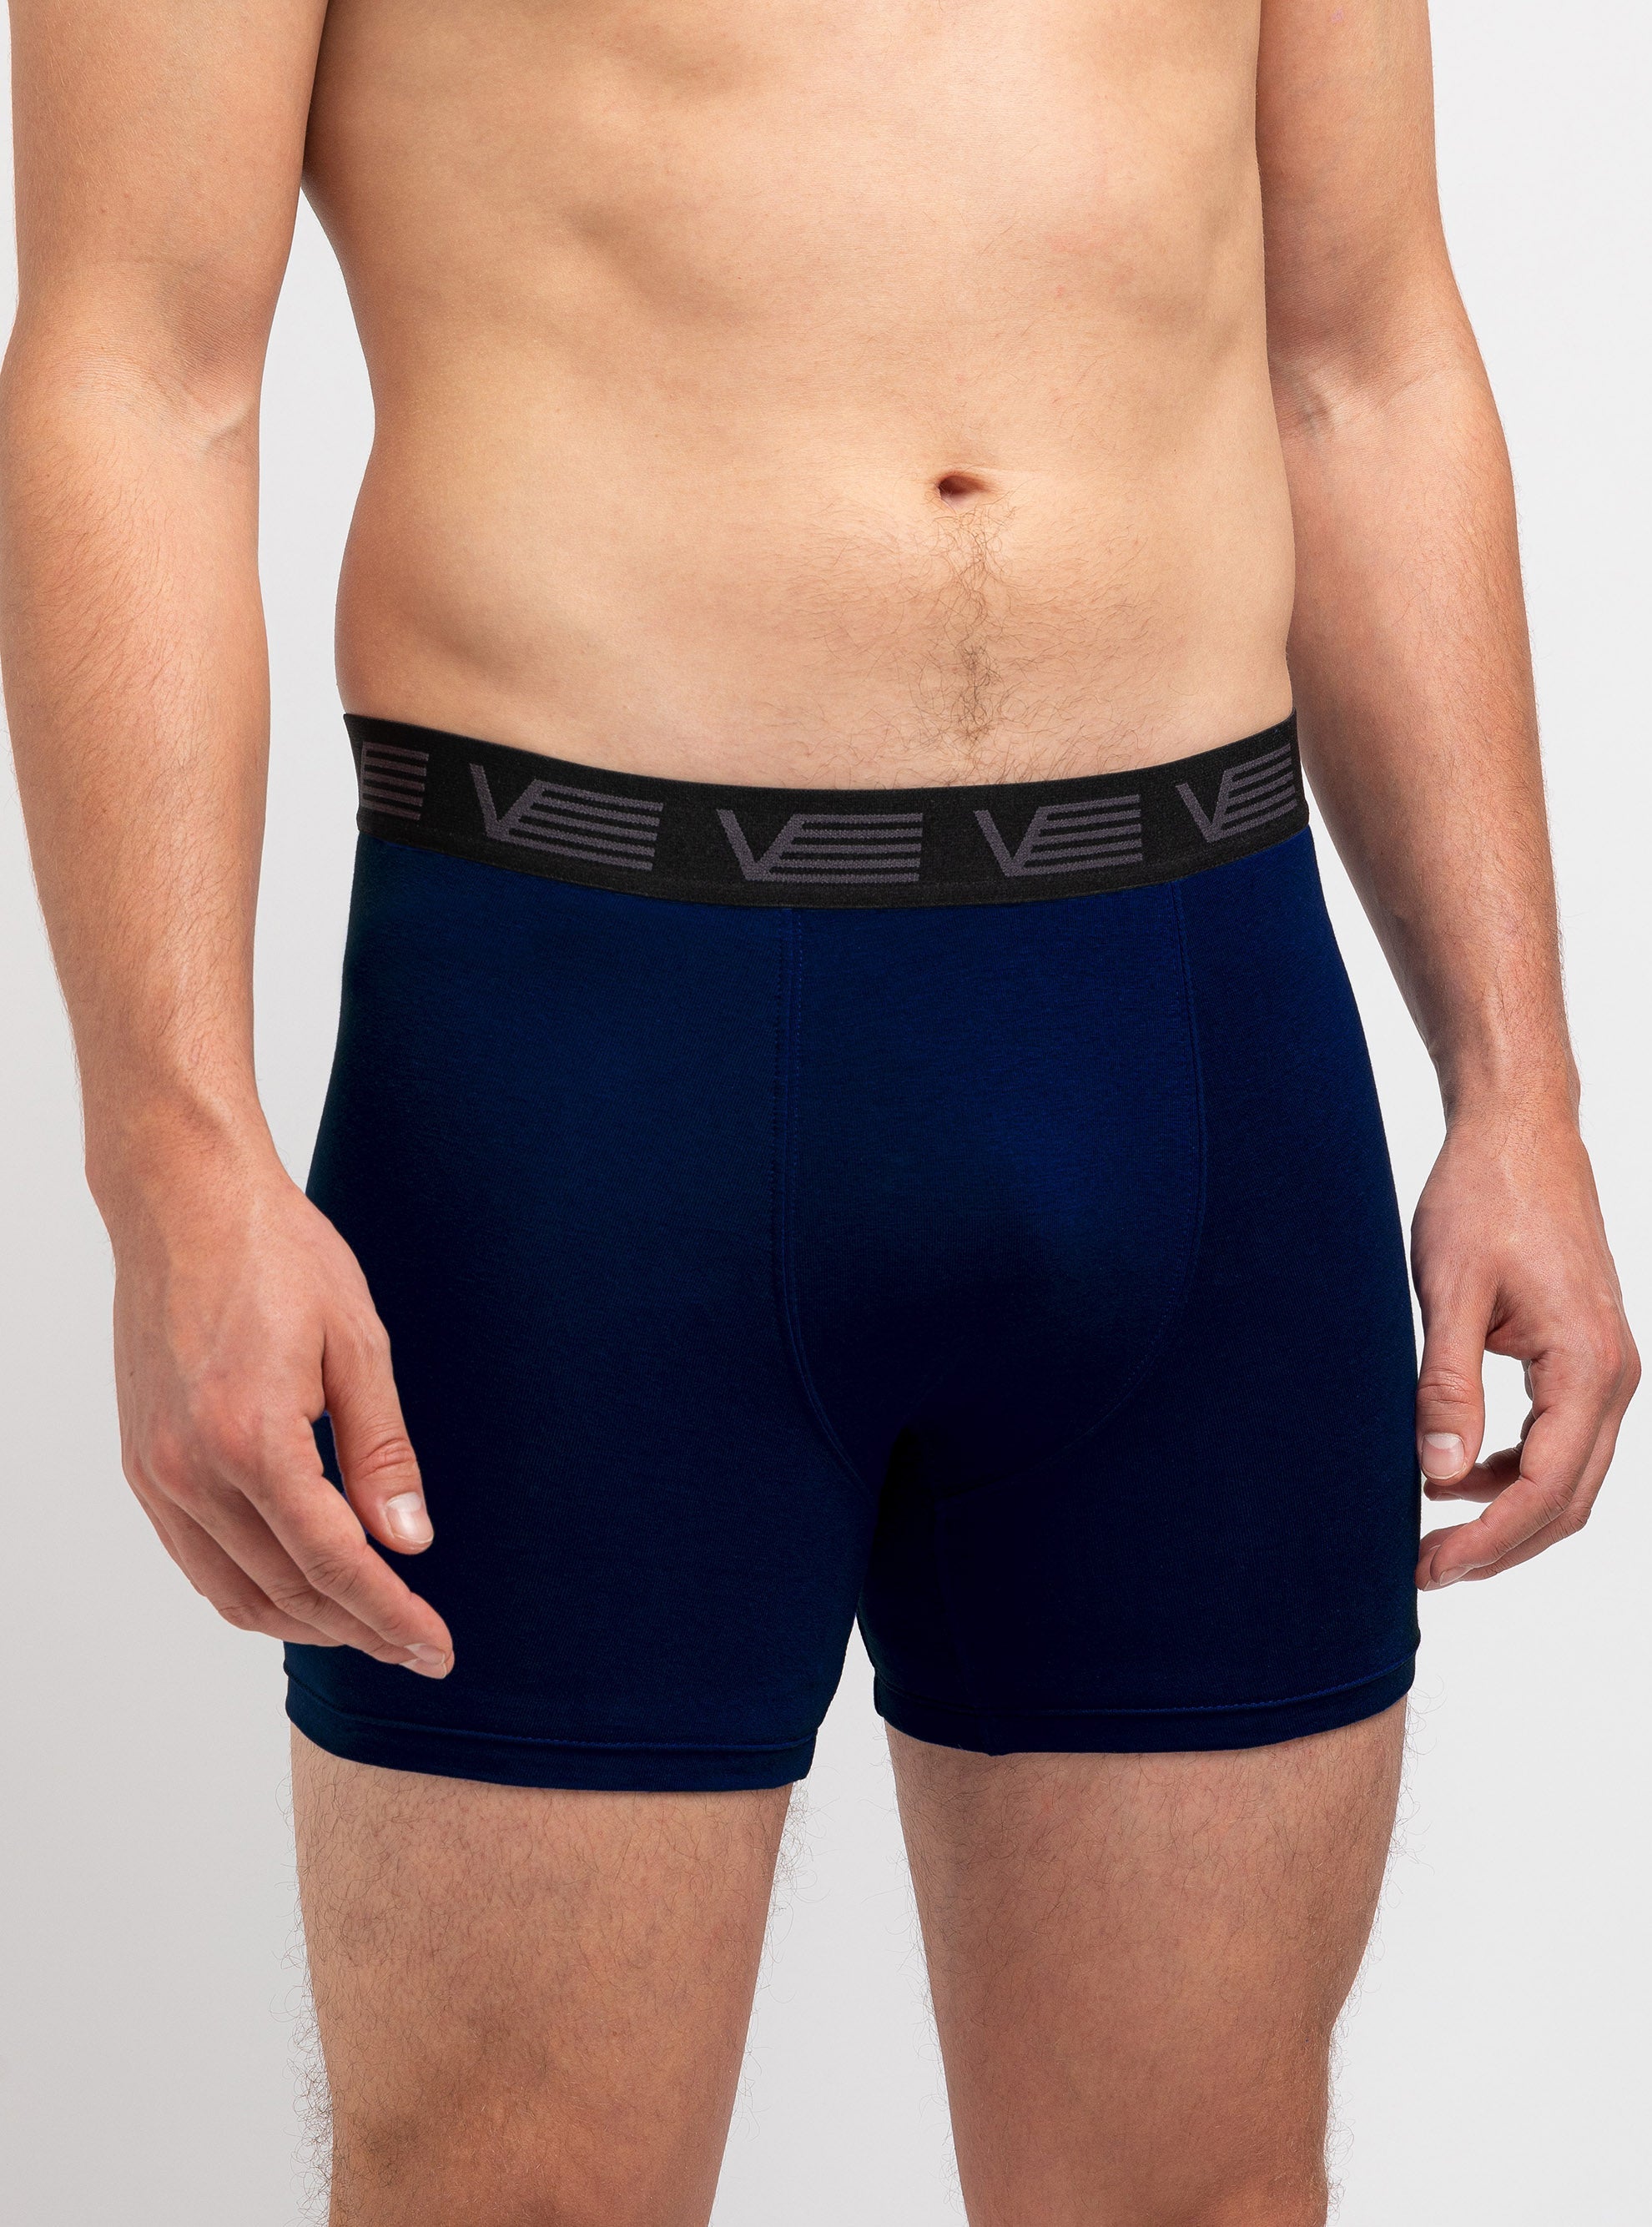 Navy solid color boxer